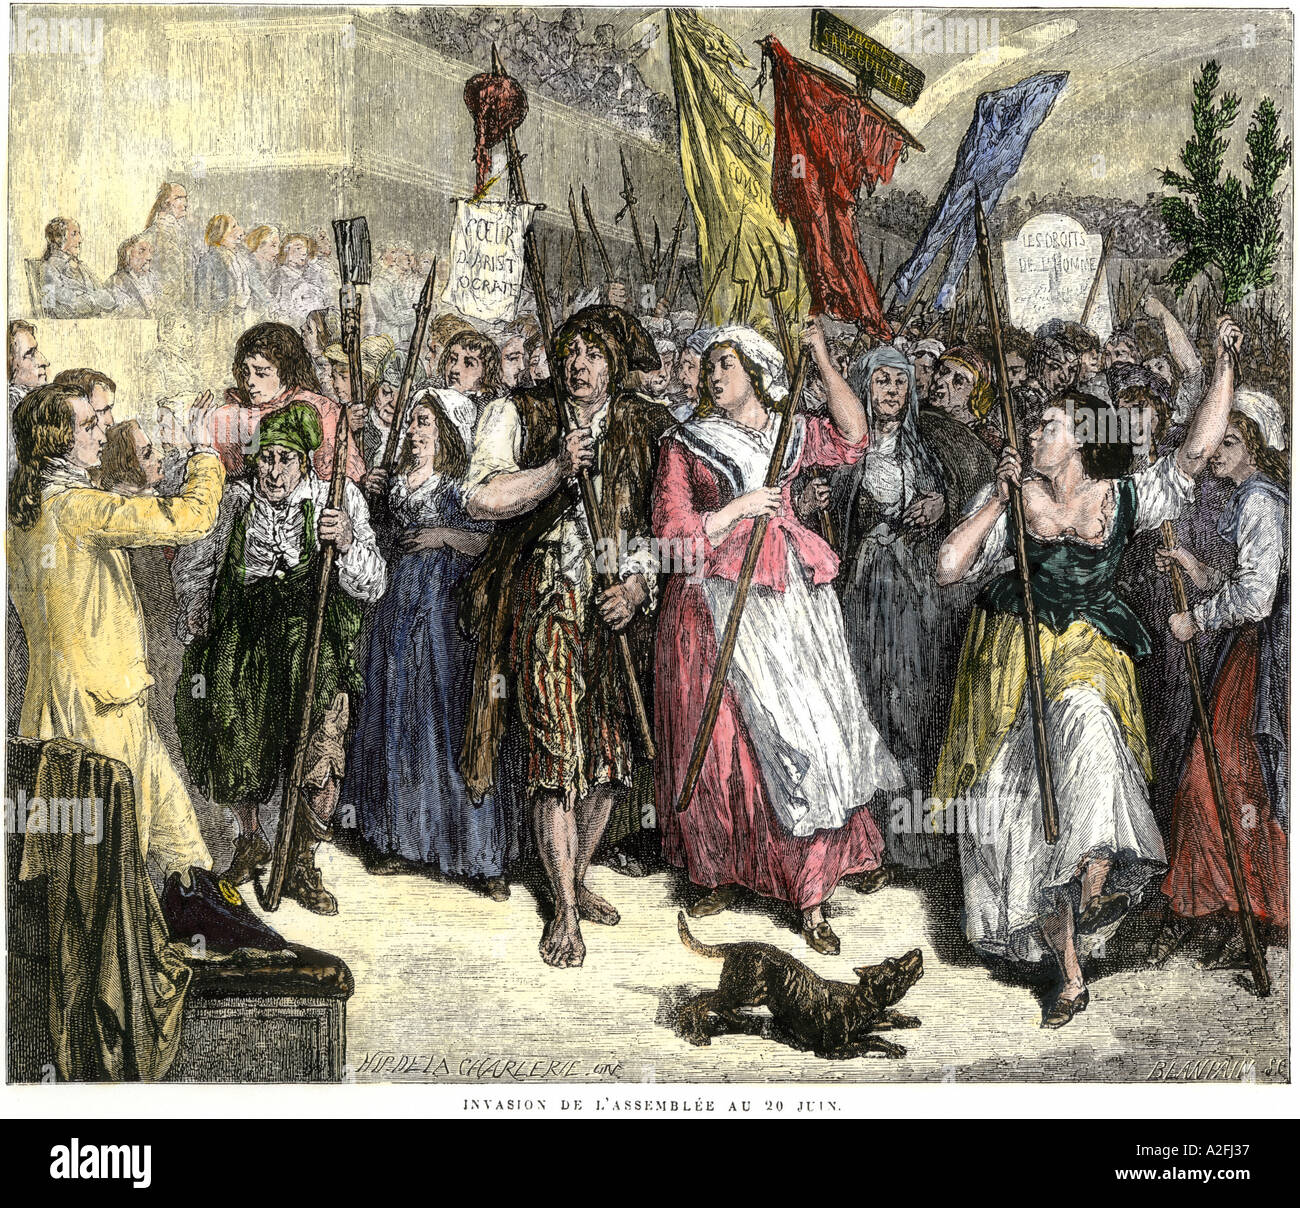 Parisians invasion of the Assembly during the French Revolution. Hand-colored woodcut Stock Photo